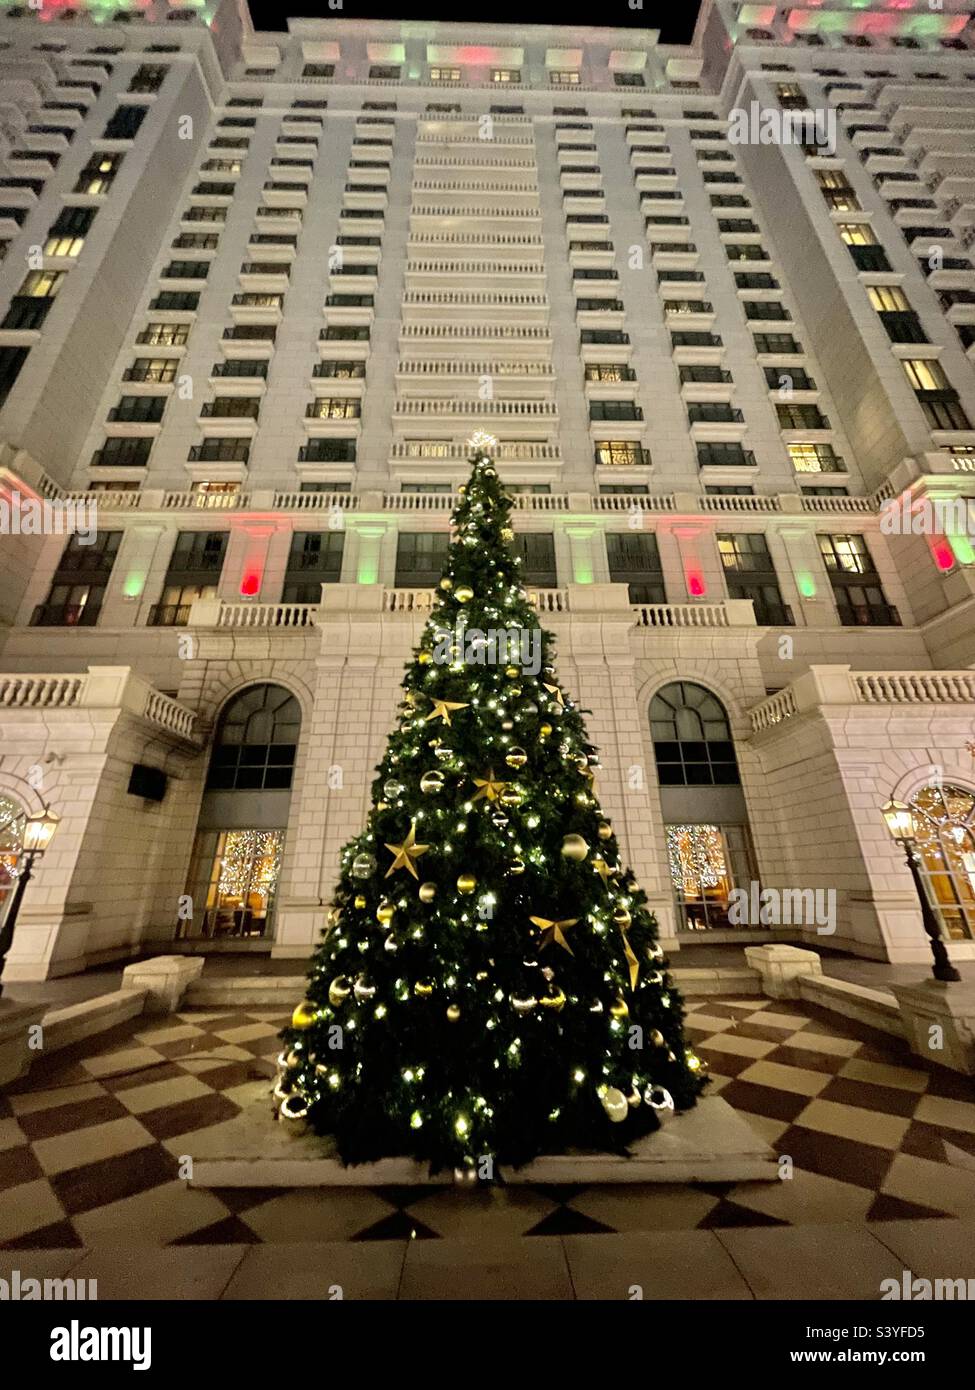 Grand America 5-star hotel in downtown Salt Lake City, Utah, USA decorated and lighted for the Christmas season. Stock Photo